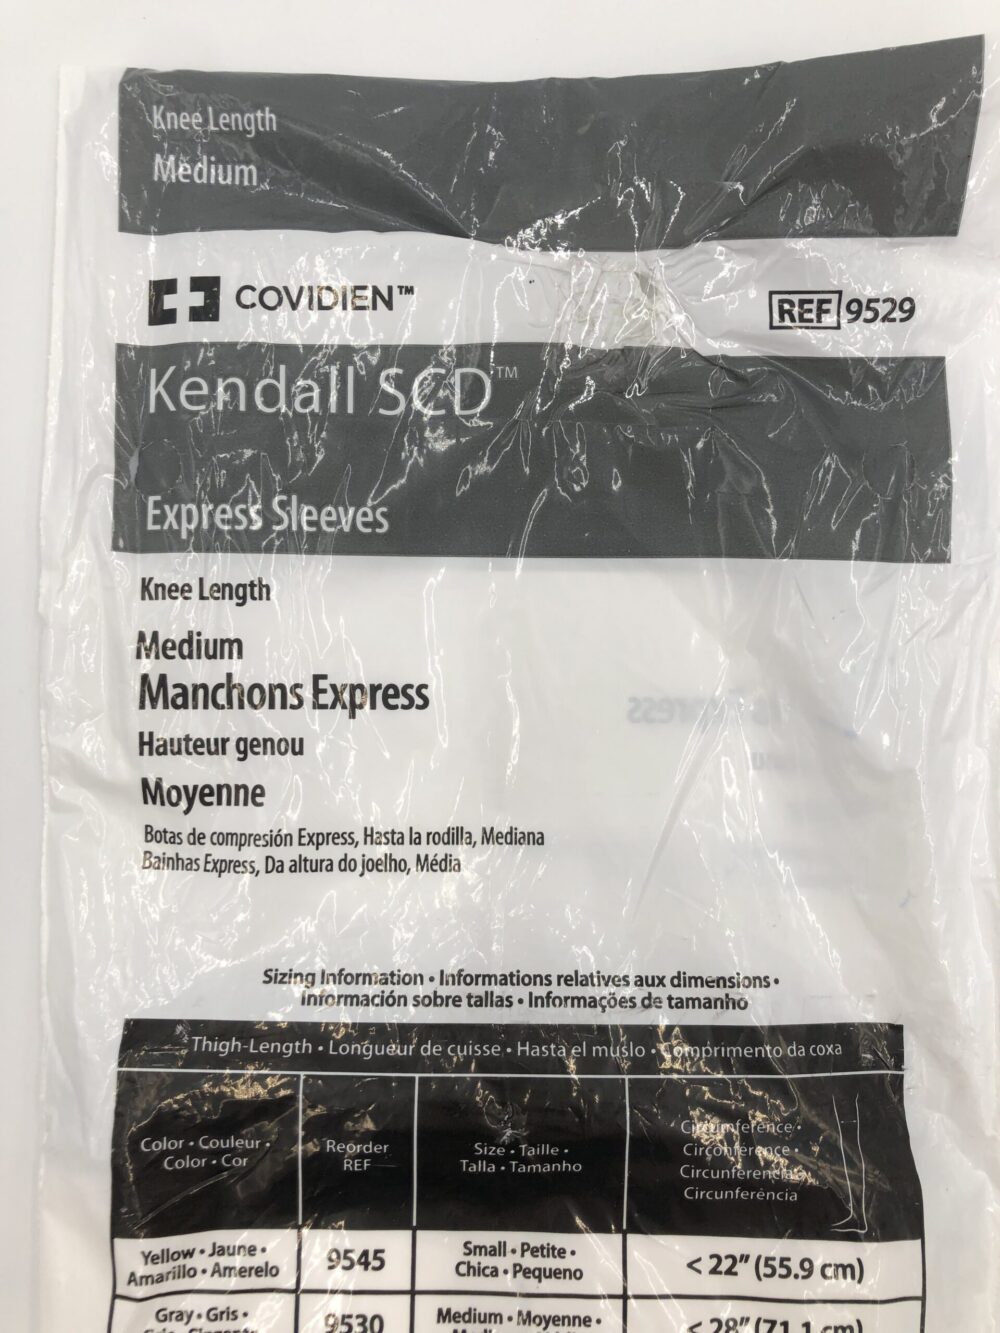 COVIDIEN 9529 Kendall SCD Express Sleeves, Knee Length, Med. (X) - GB ...